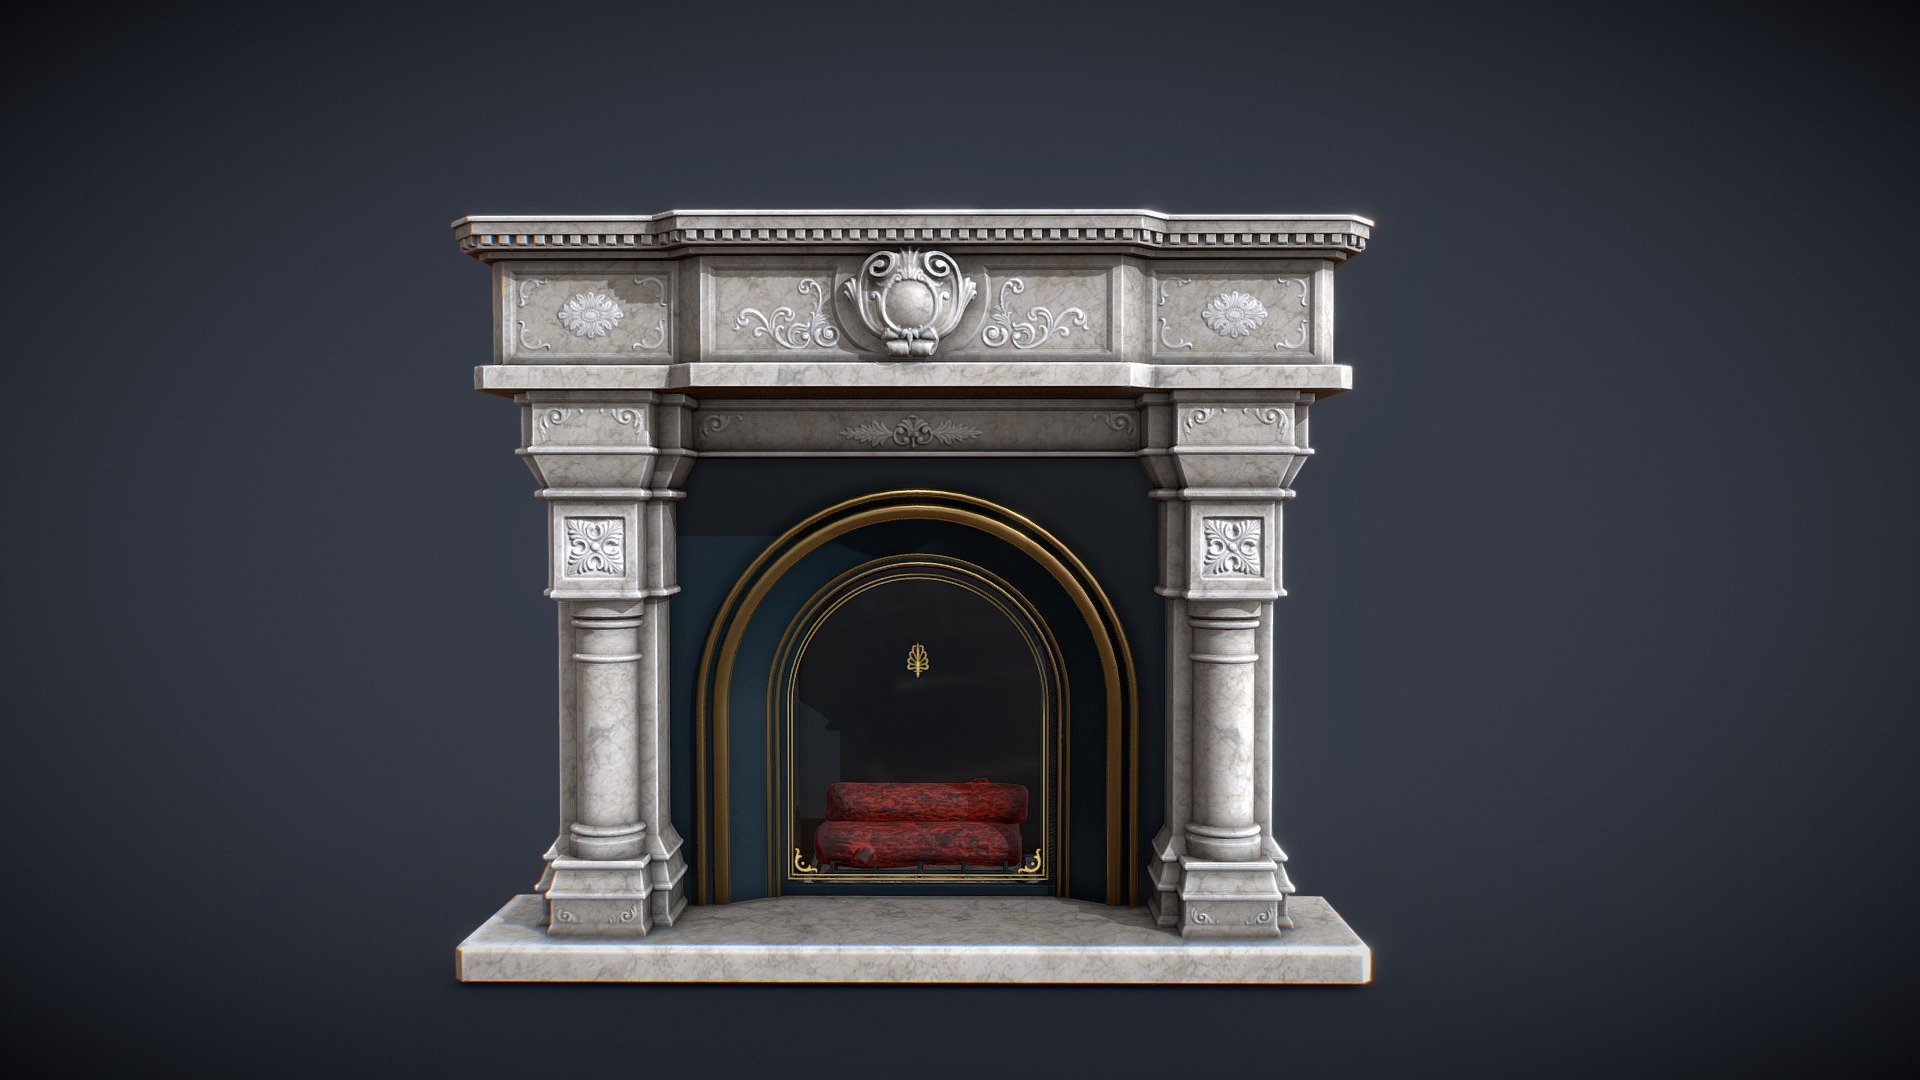 Hello folks :) This is a fireplace asset made for a victorian project. Built in the marble it will last long and warm the room perfectly !

Made with Maya, PS and Substance.

You will find in the package Scene file, FBX and 4k Textures.
If you have any customs need, please feel free to contact me 3d model